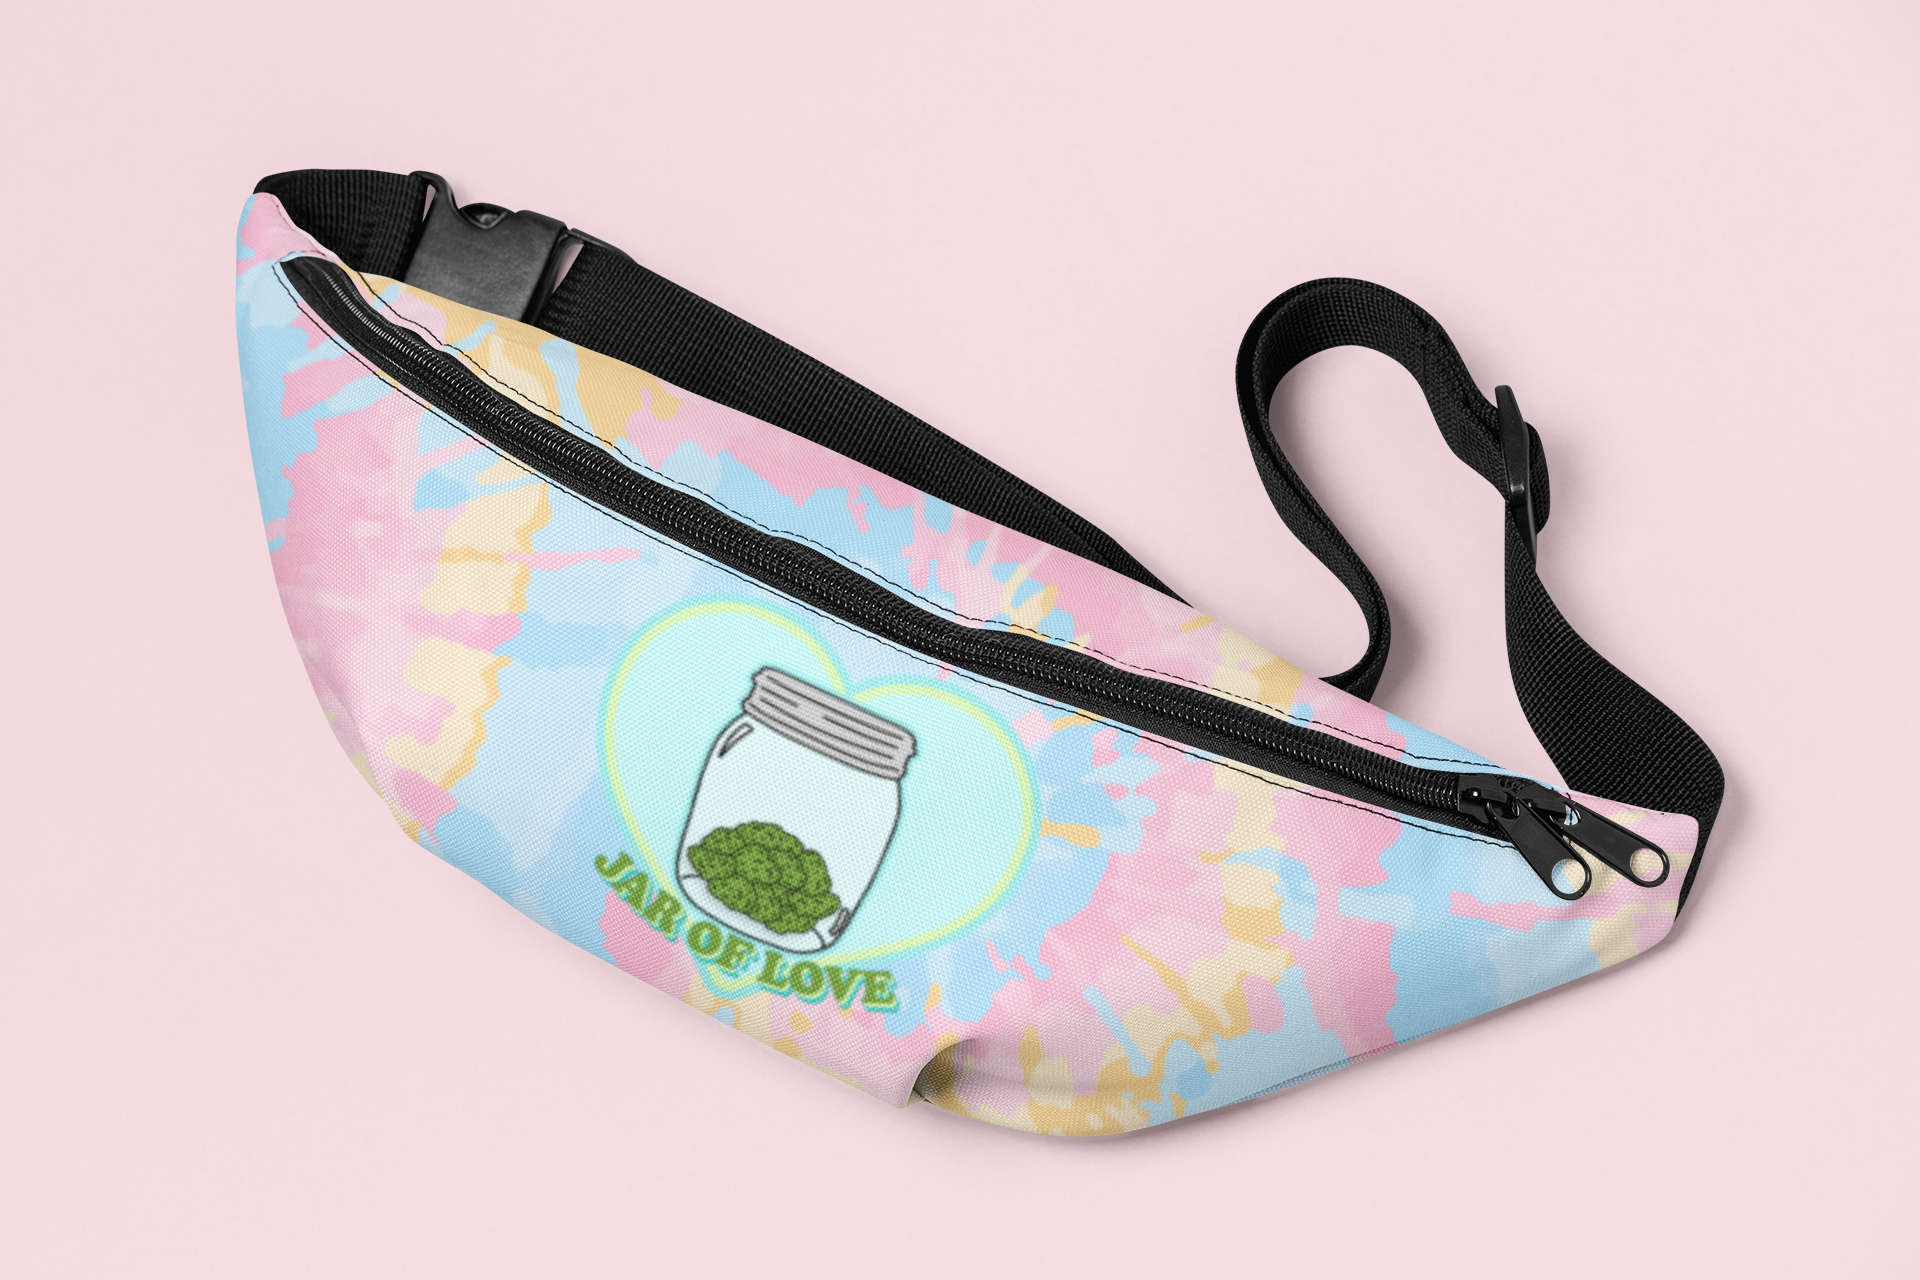 Tie-dye fanny pack with a jar of weed saying jar of love - HighCiti